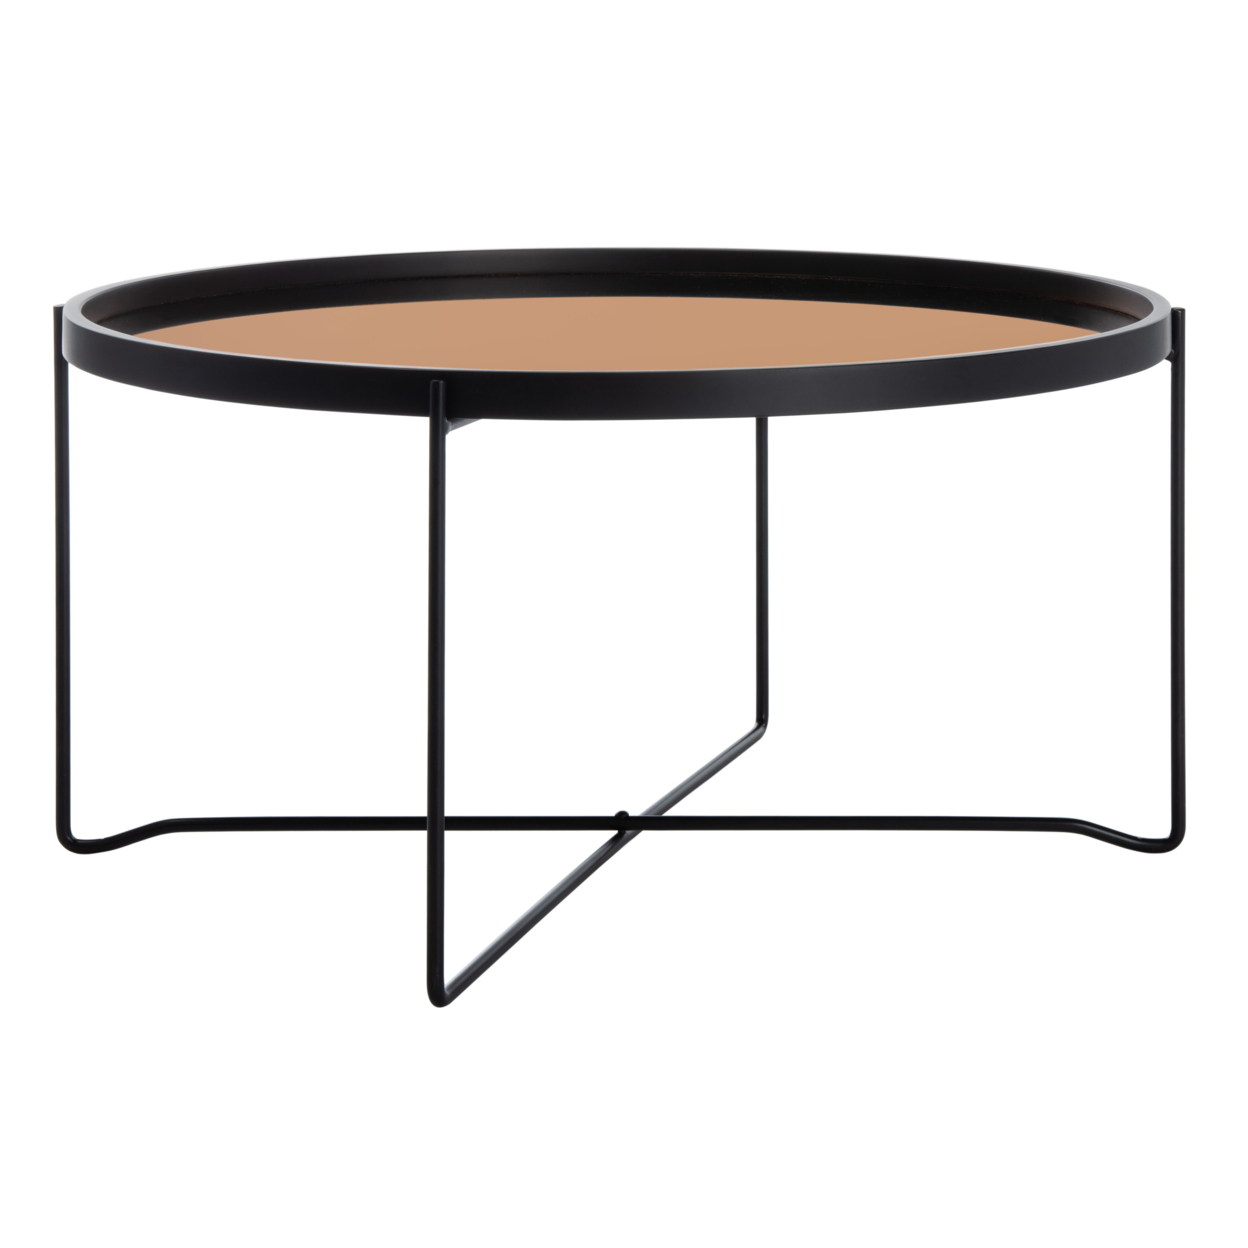 SAFAVIEH Ruby Round Tray Top Coffee Table Rose Gold / Black